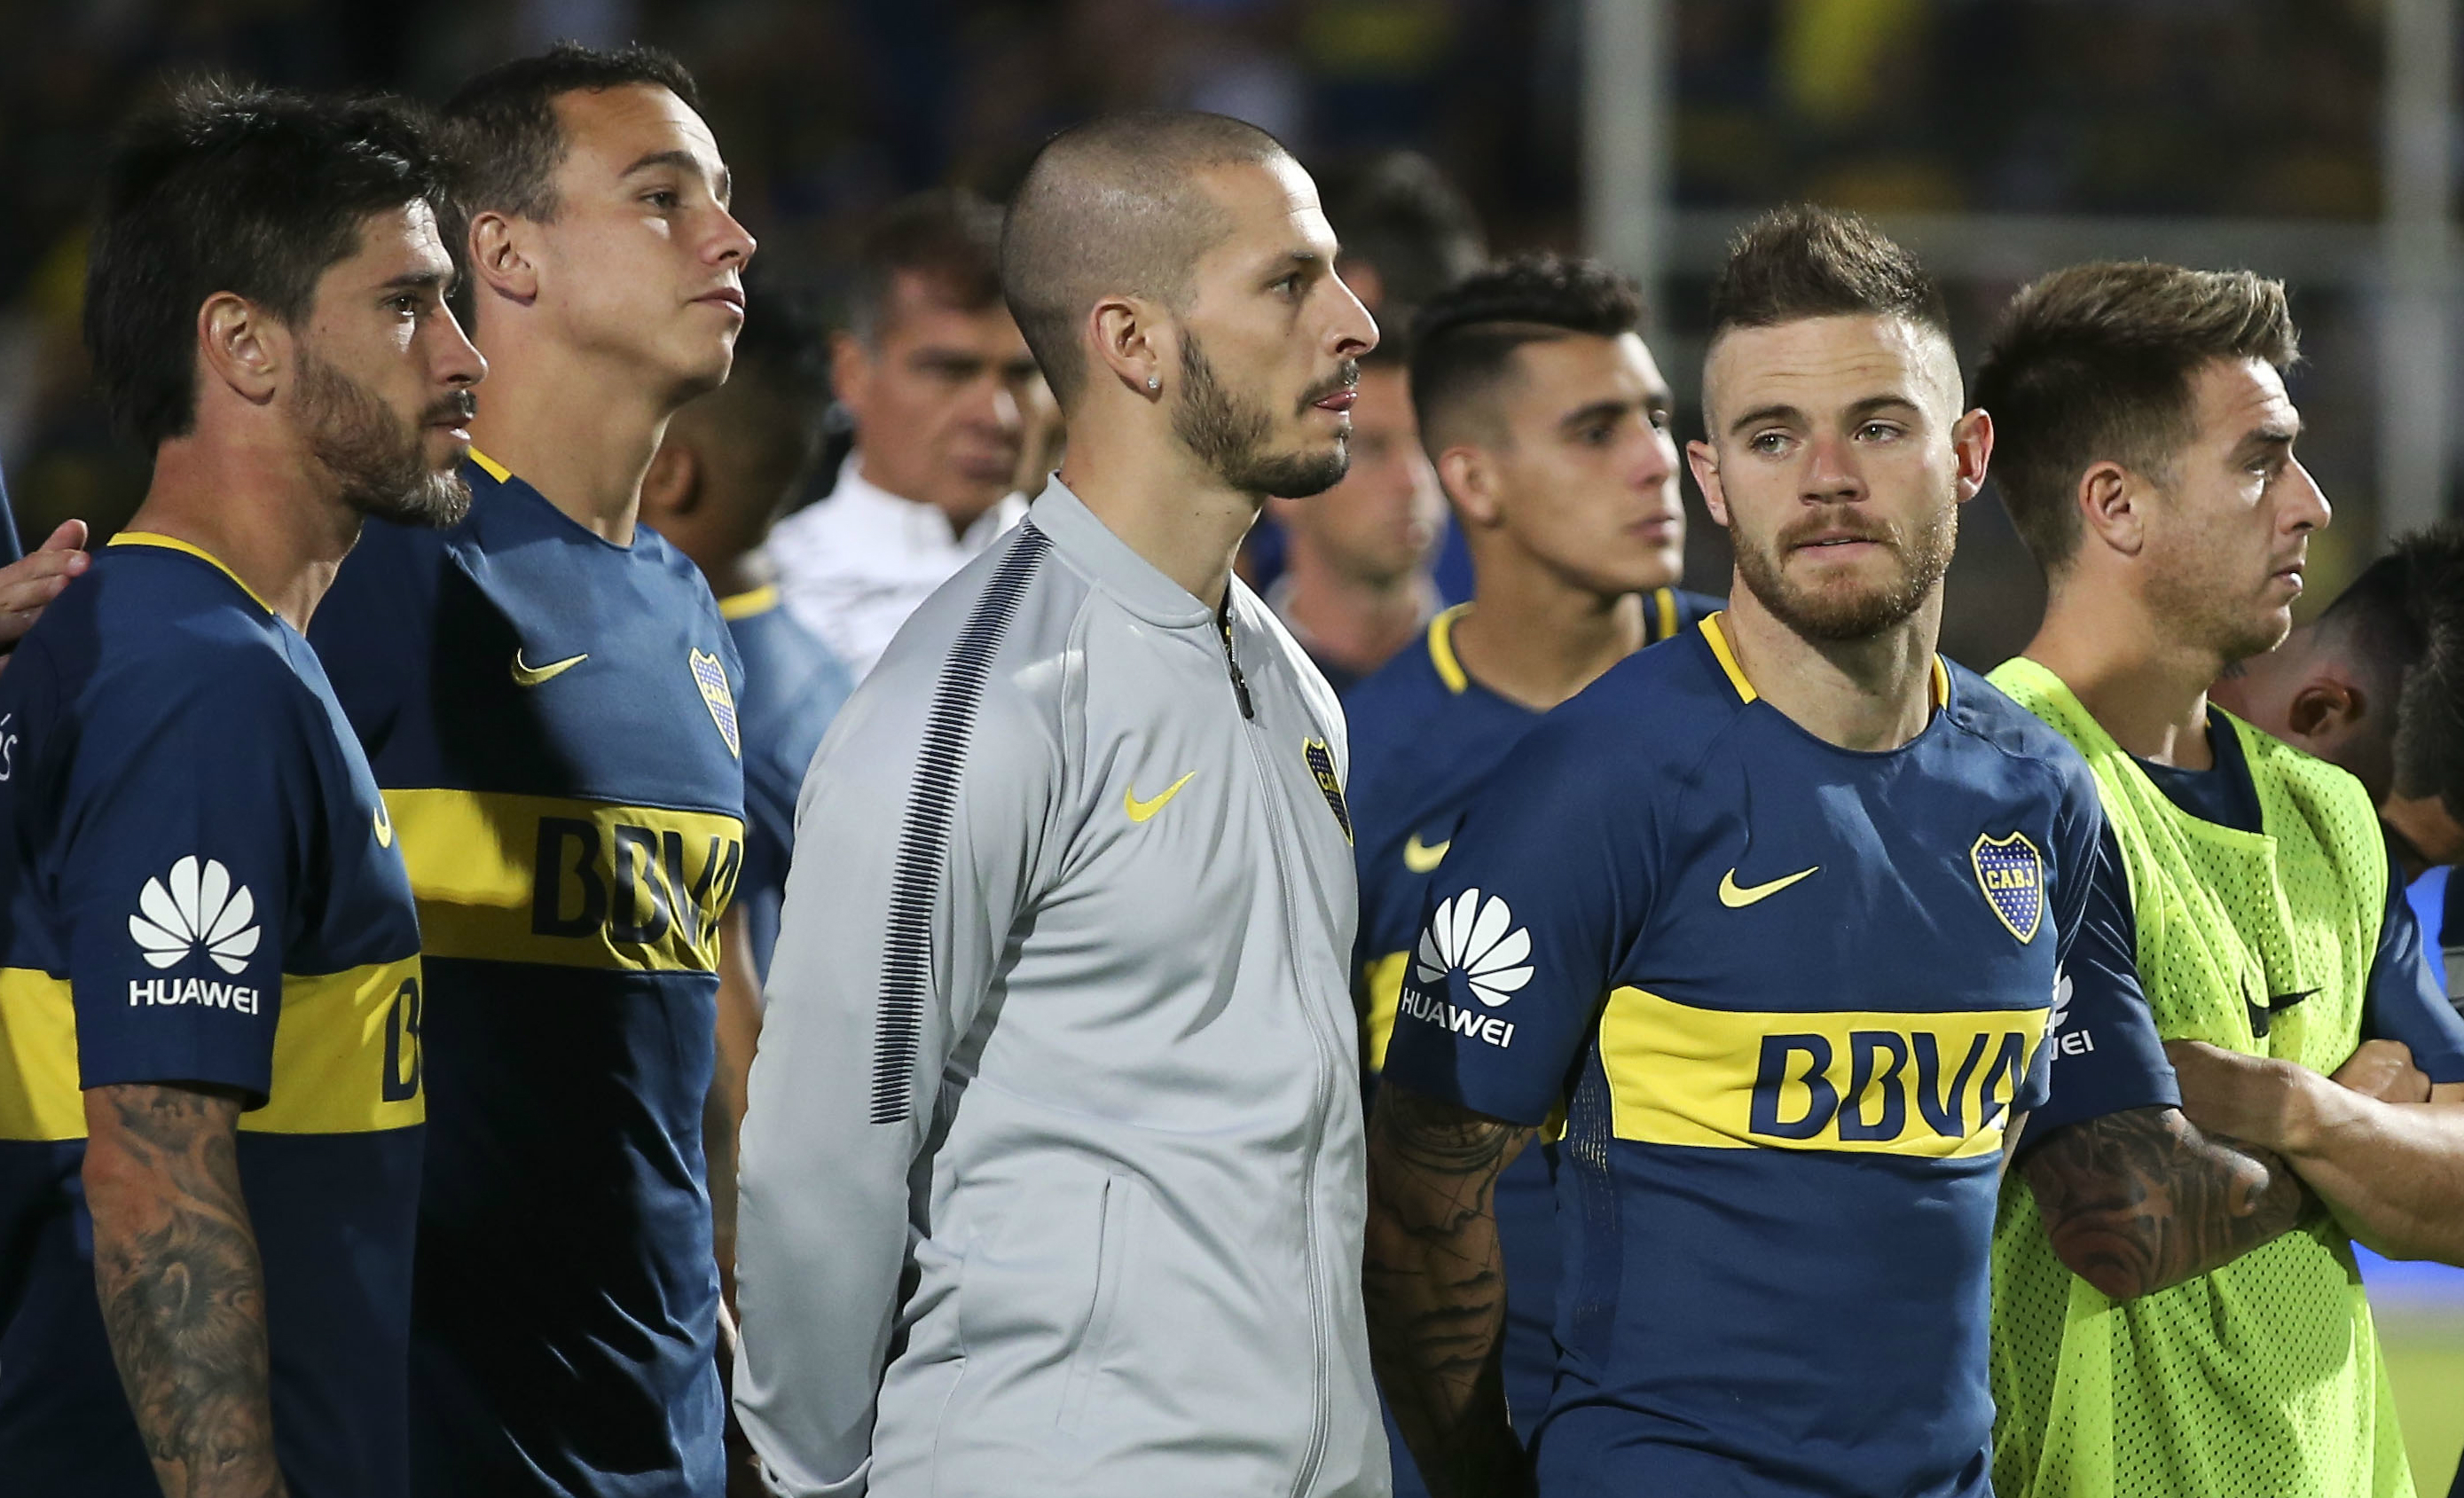 Football will triumph in the Copa Libertadores final second leg between Boca Juniors and River Plate, according to CONMEBOL's president.